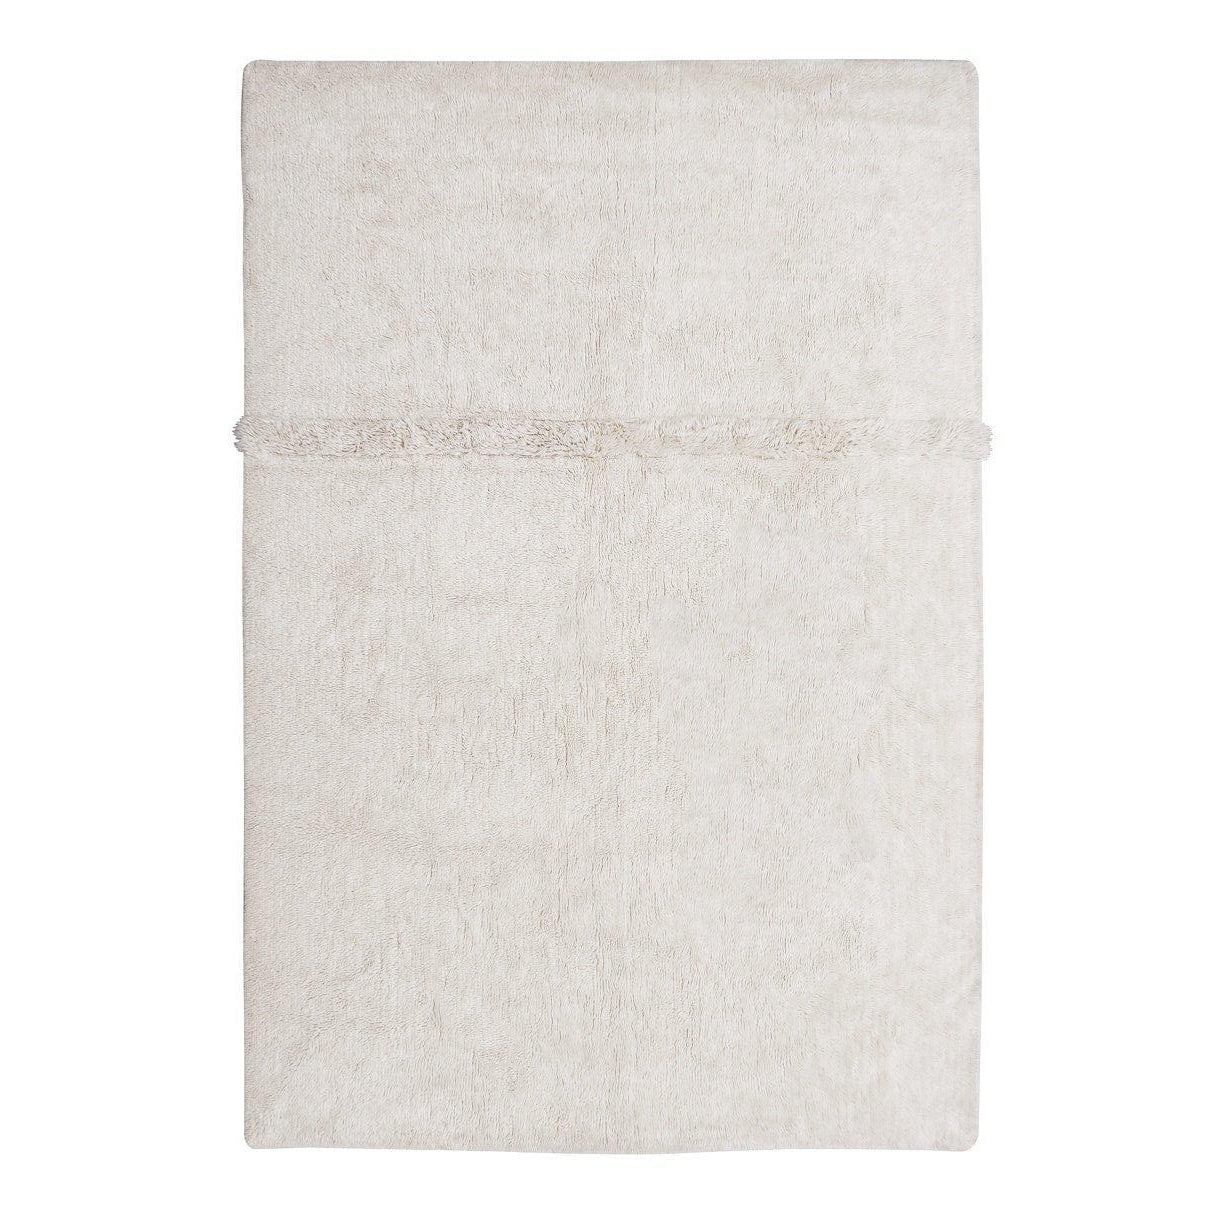 Lorena Canals Tundra White Woolable Area Rug